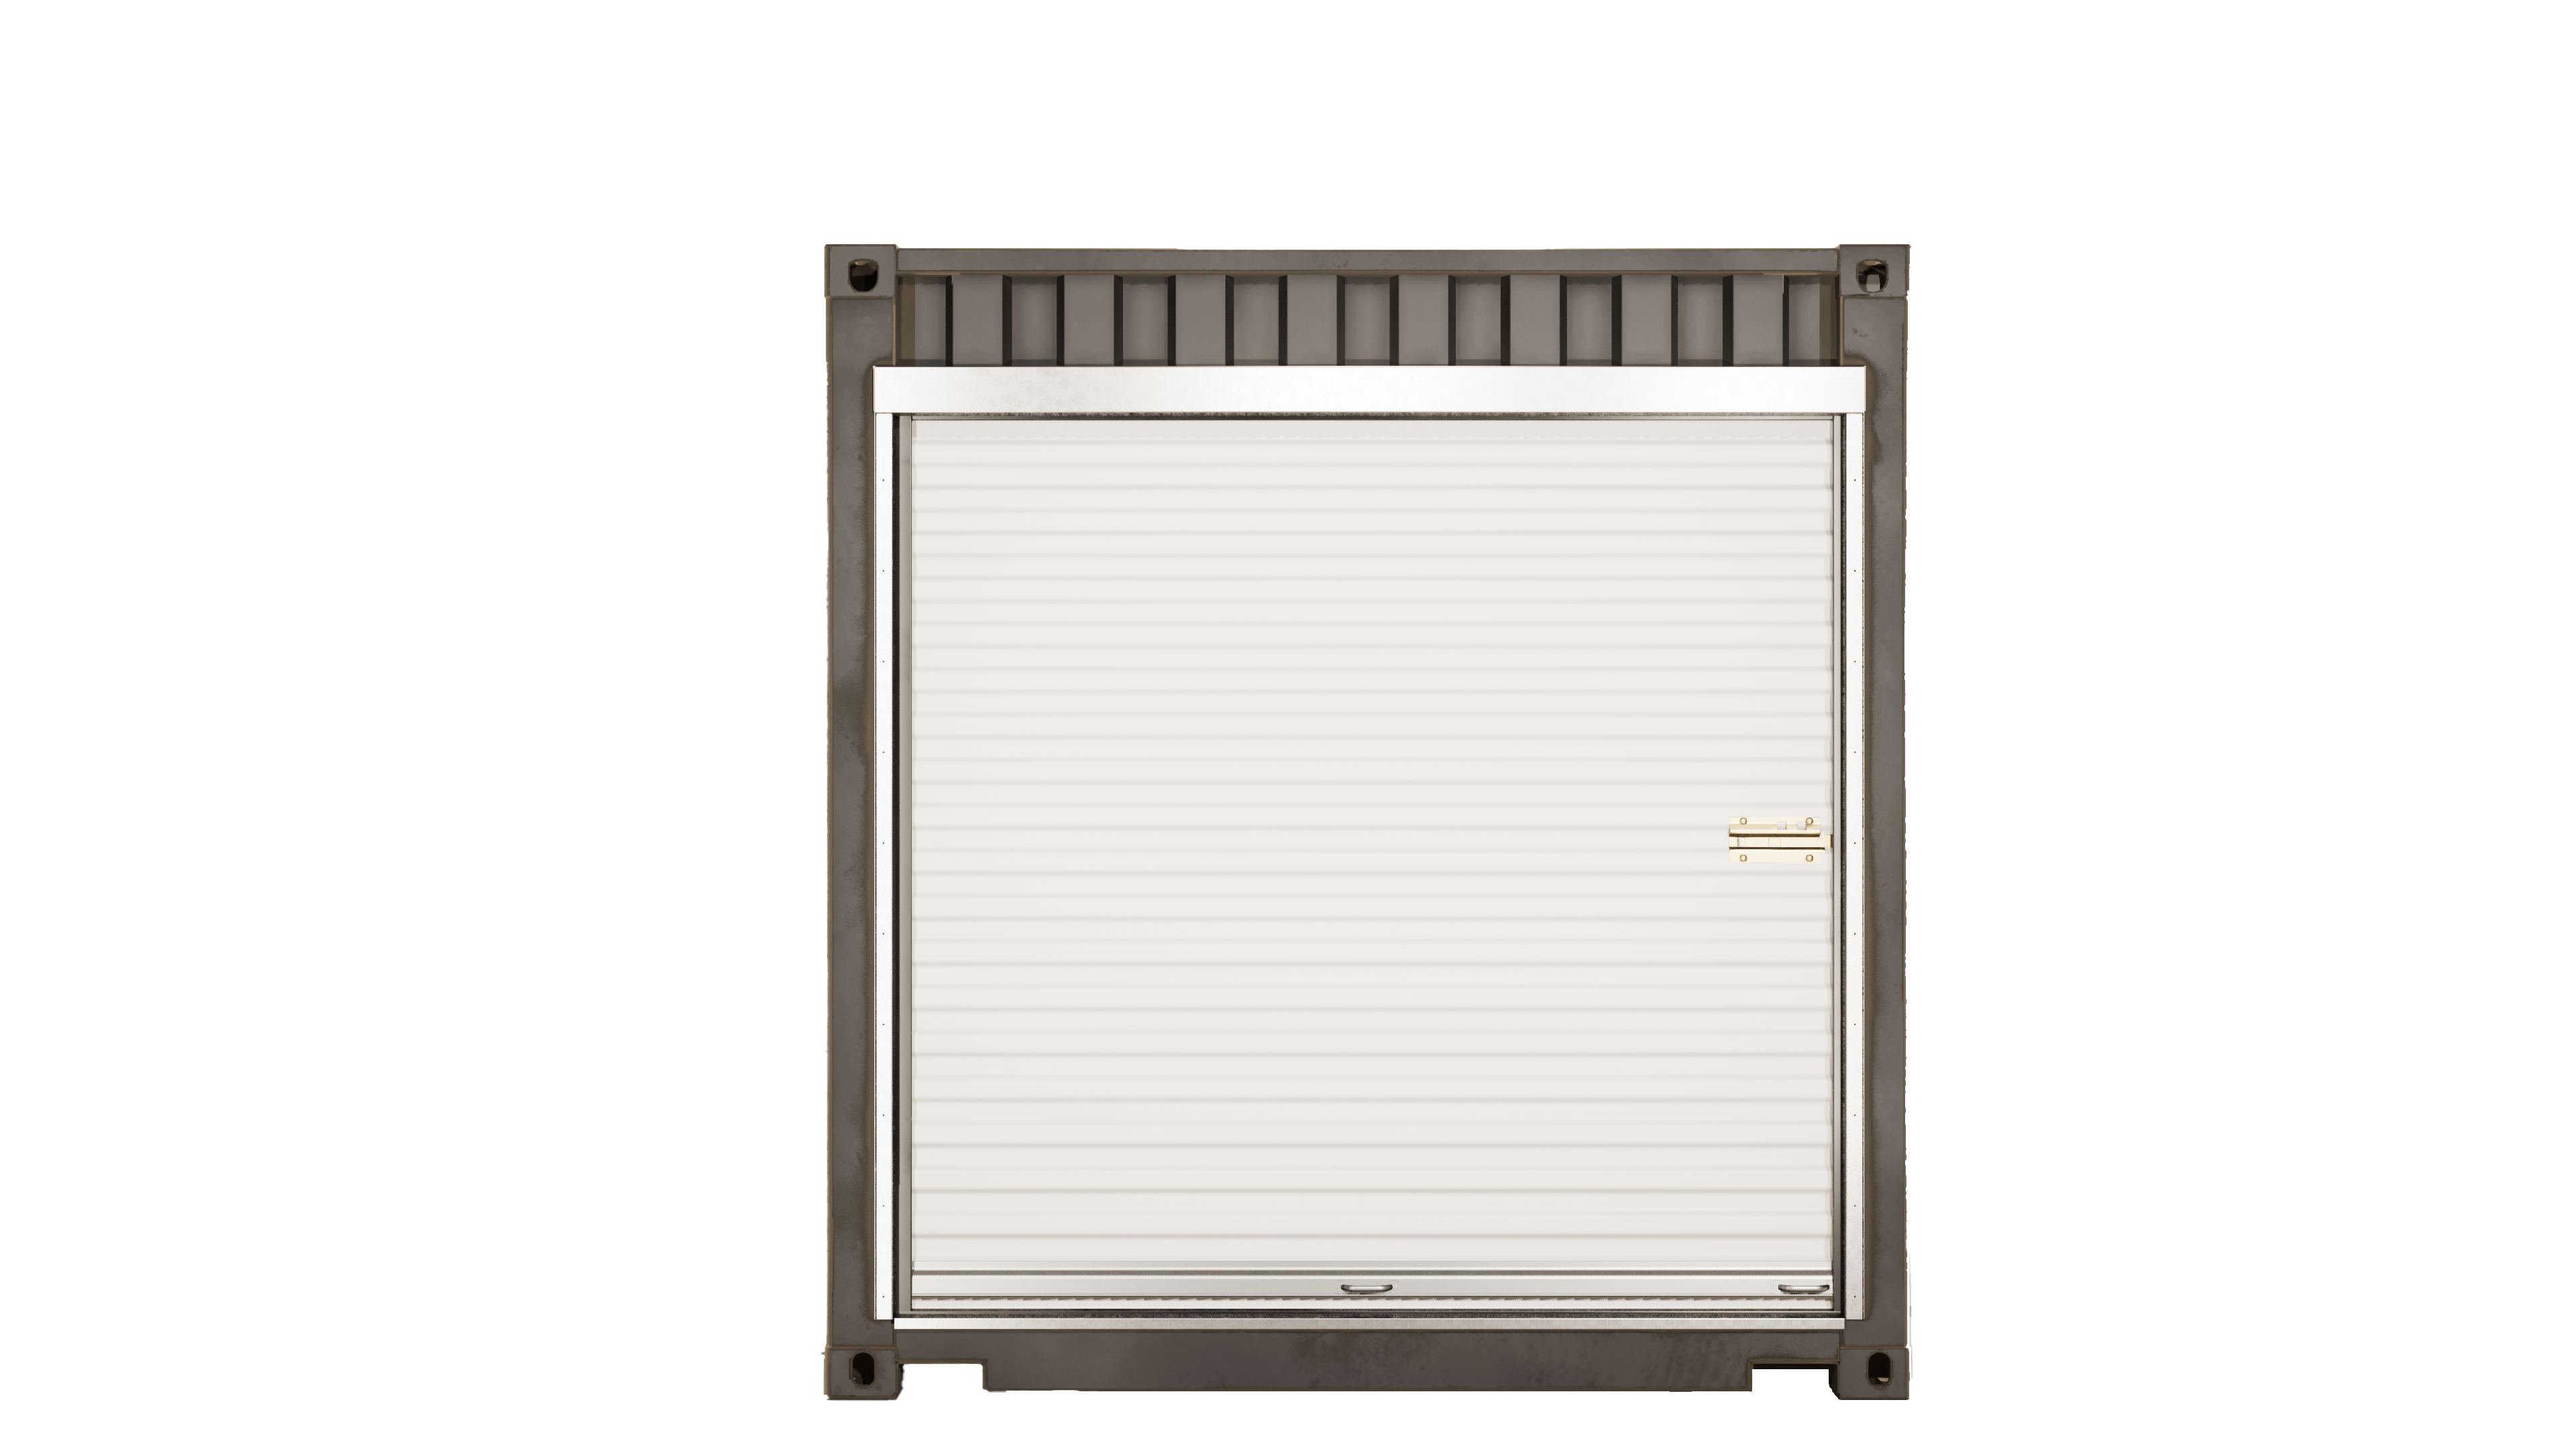 Standard Container Size (8'6" Tall Container) End Wall Galvanized RUD Framing Kit (7' x 6'8") - Door Not Included (Please contact us before placing order so we can provide accurate shipping quote)